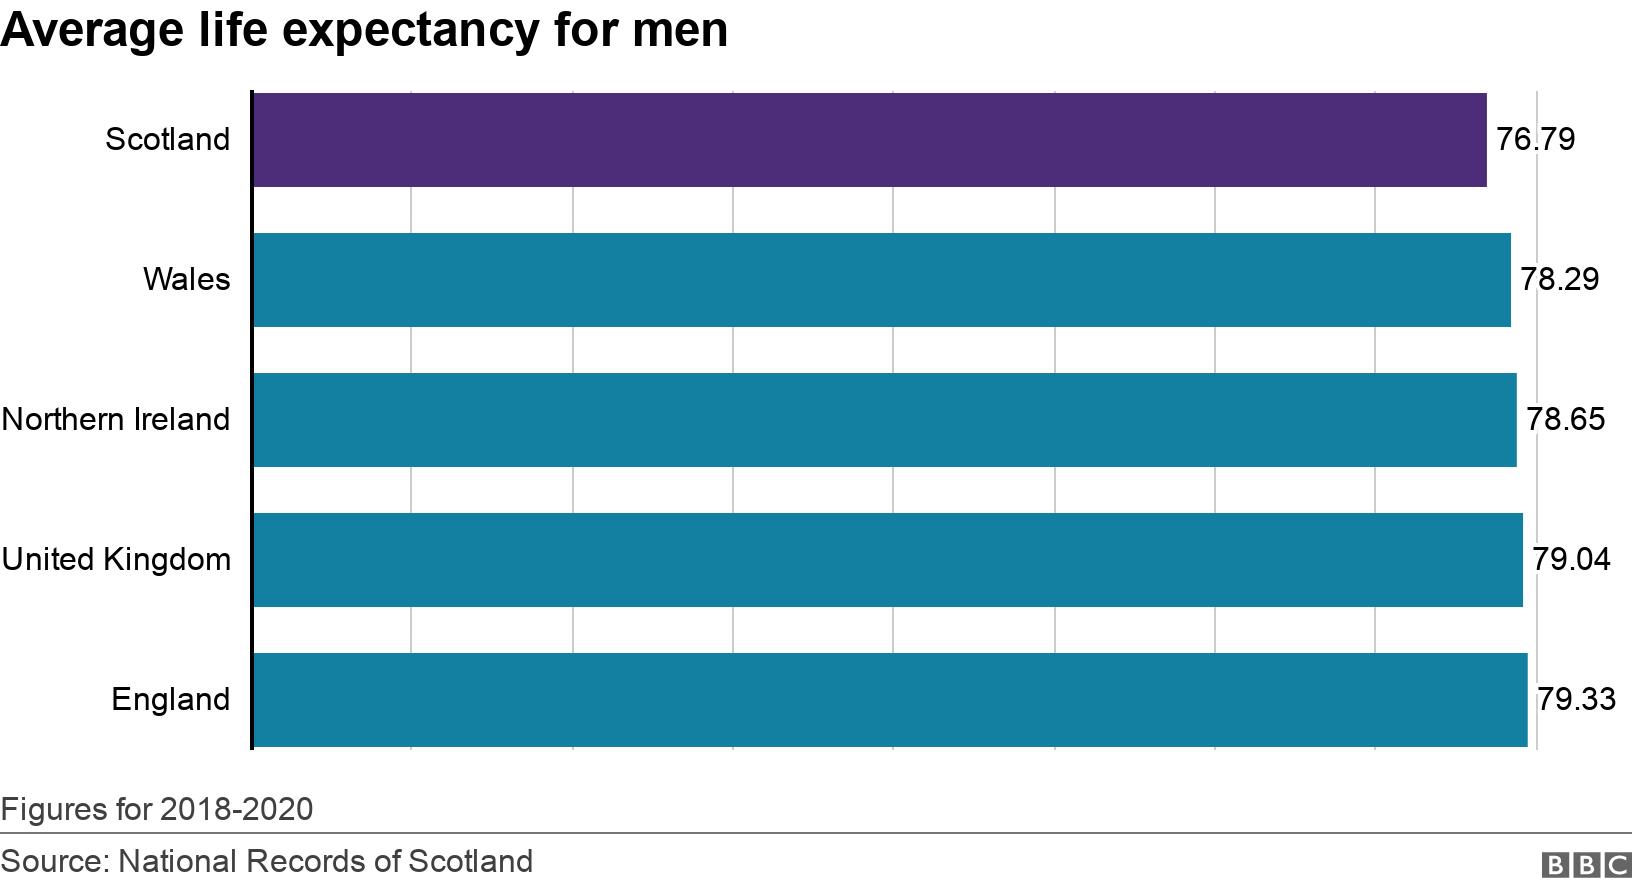 Average life expectancy for women. .  Figures for 2018-2020.